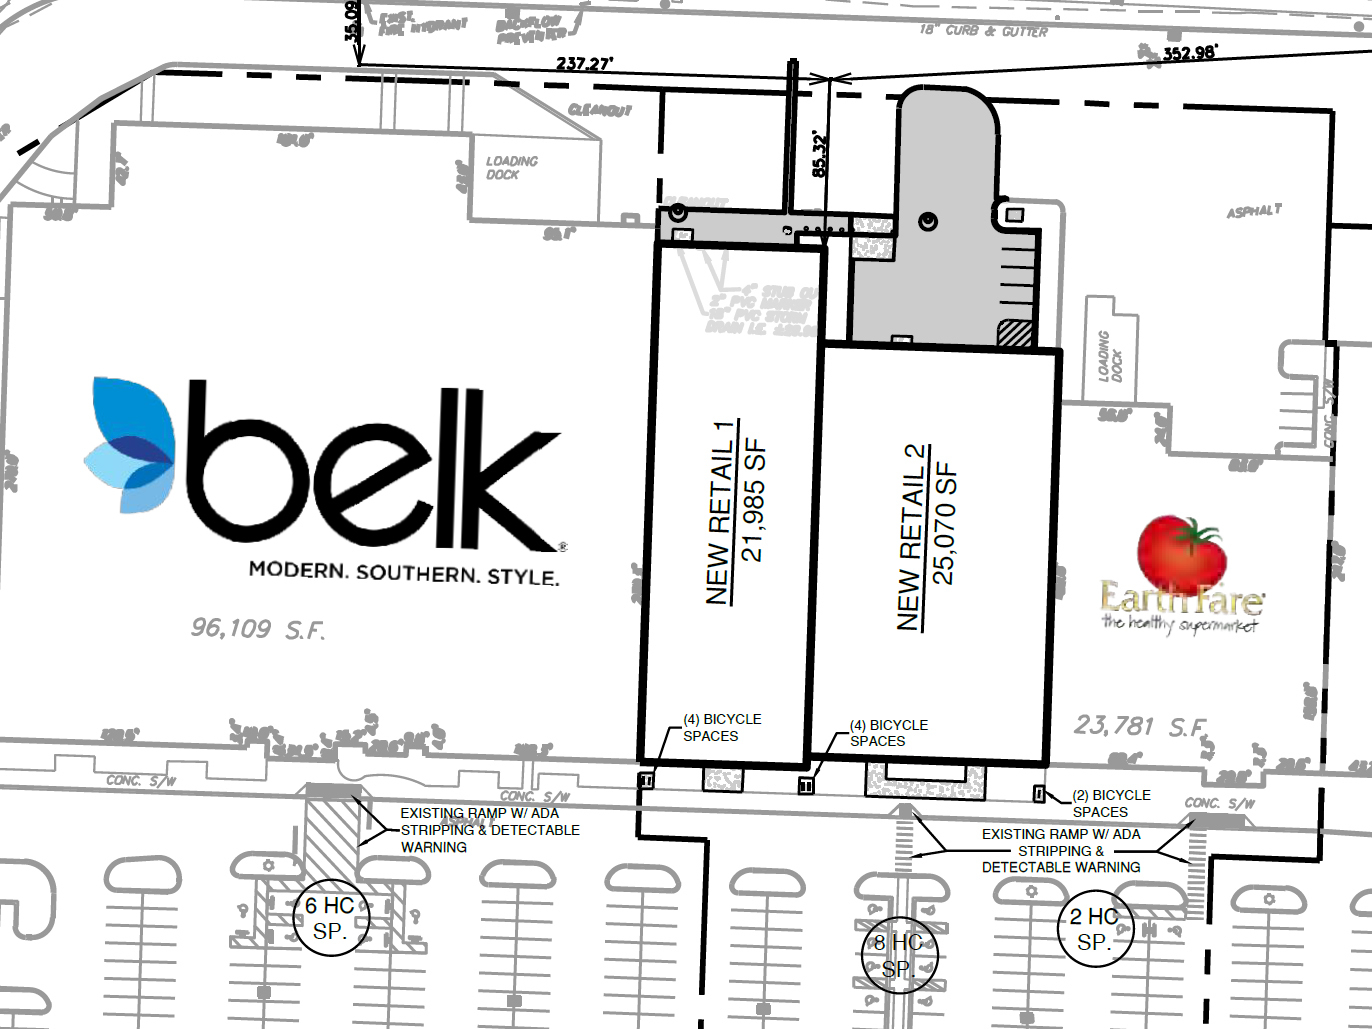 Two new shops are planned between Belk and the former Earth Fare grocery.